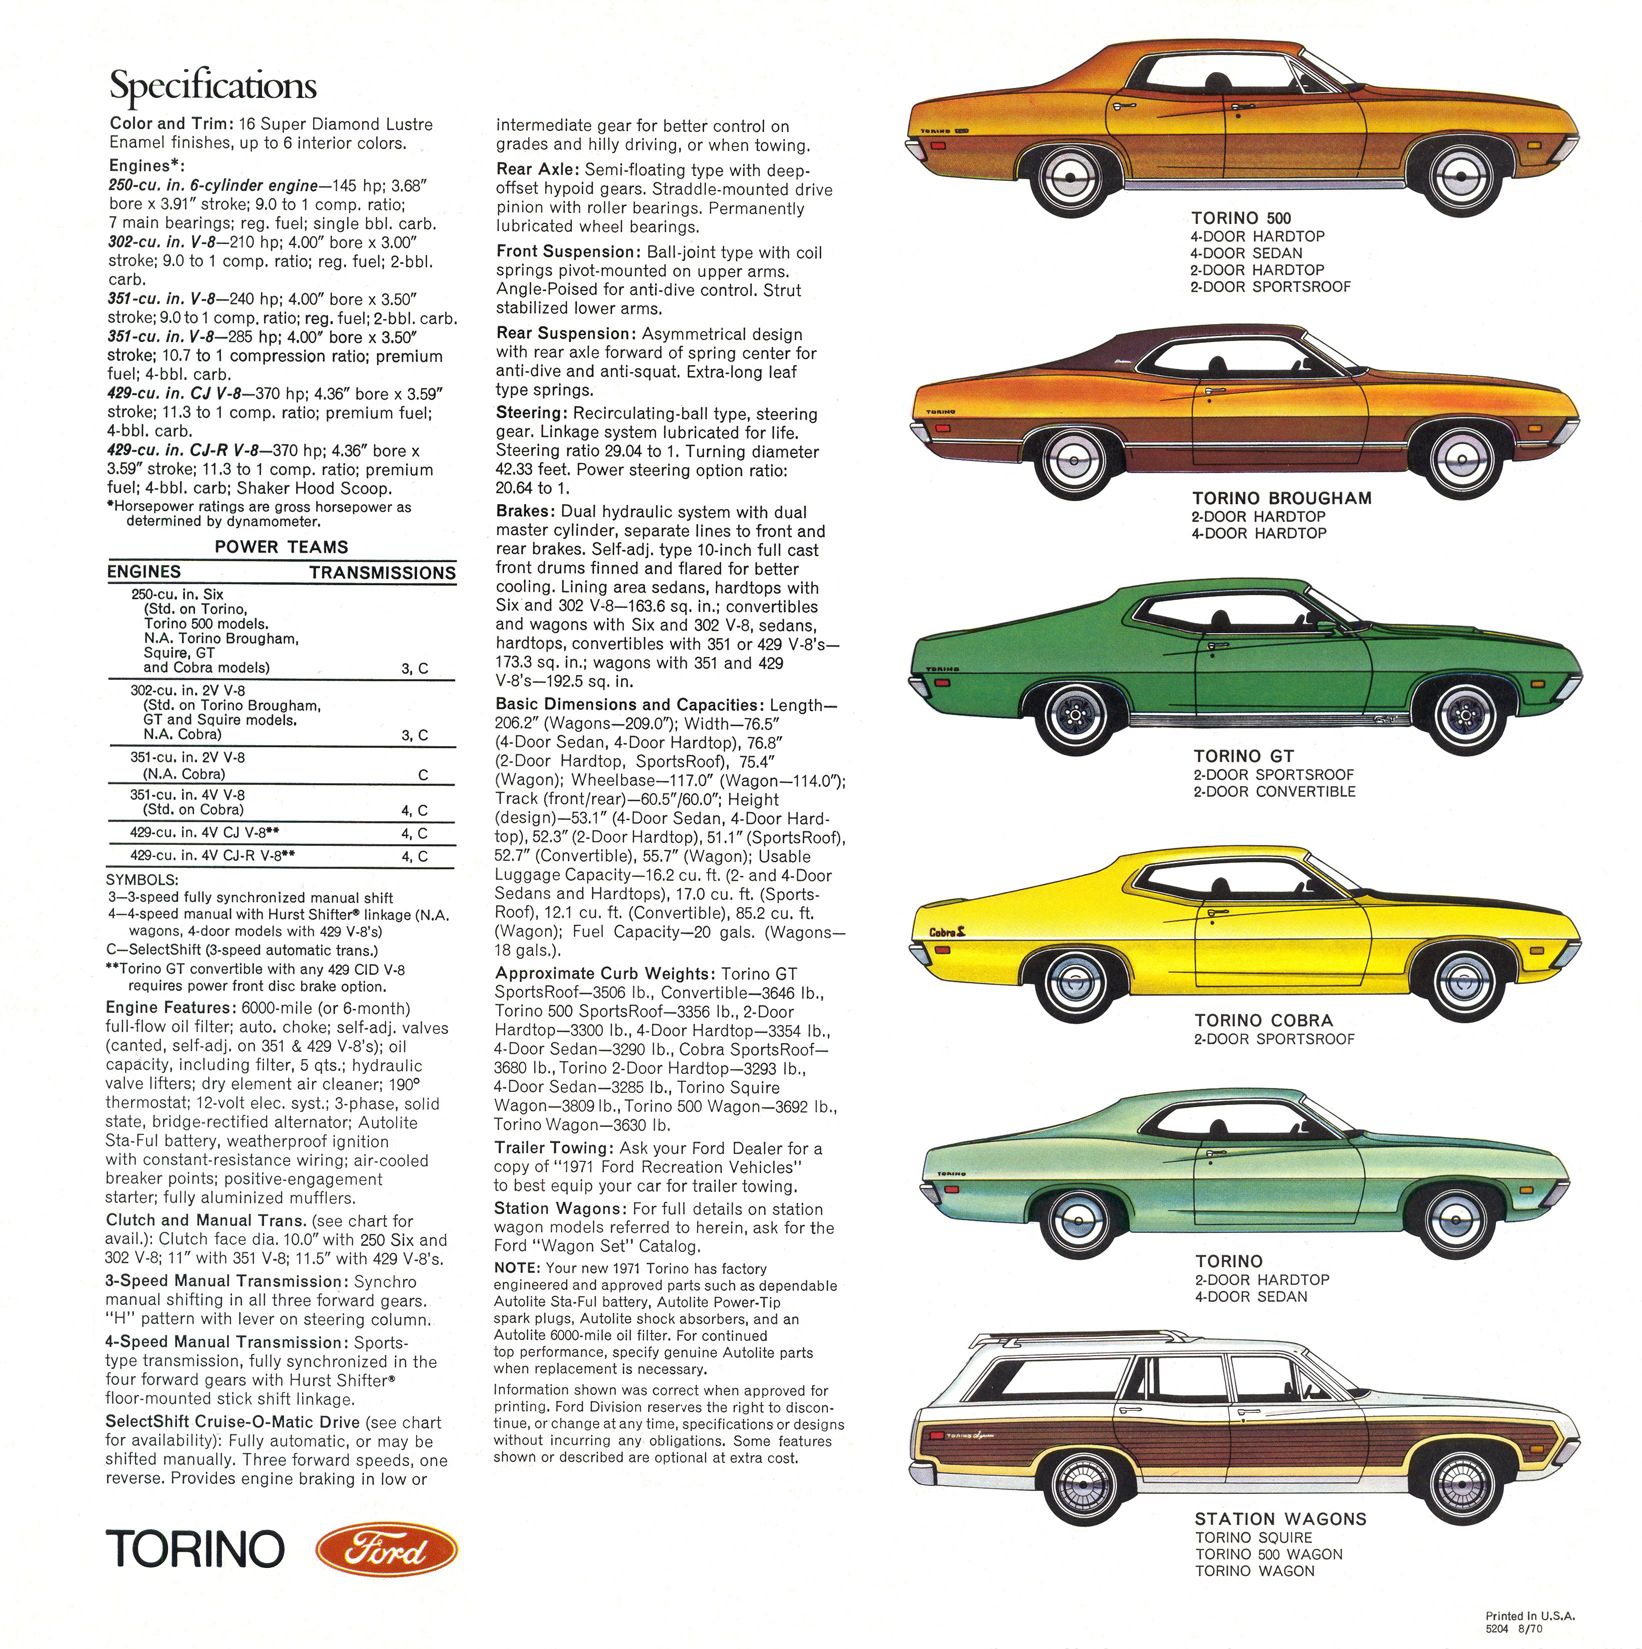 1971 Ford Torino Brochure Page 6